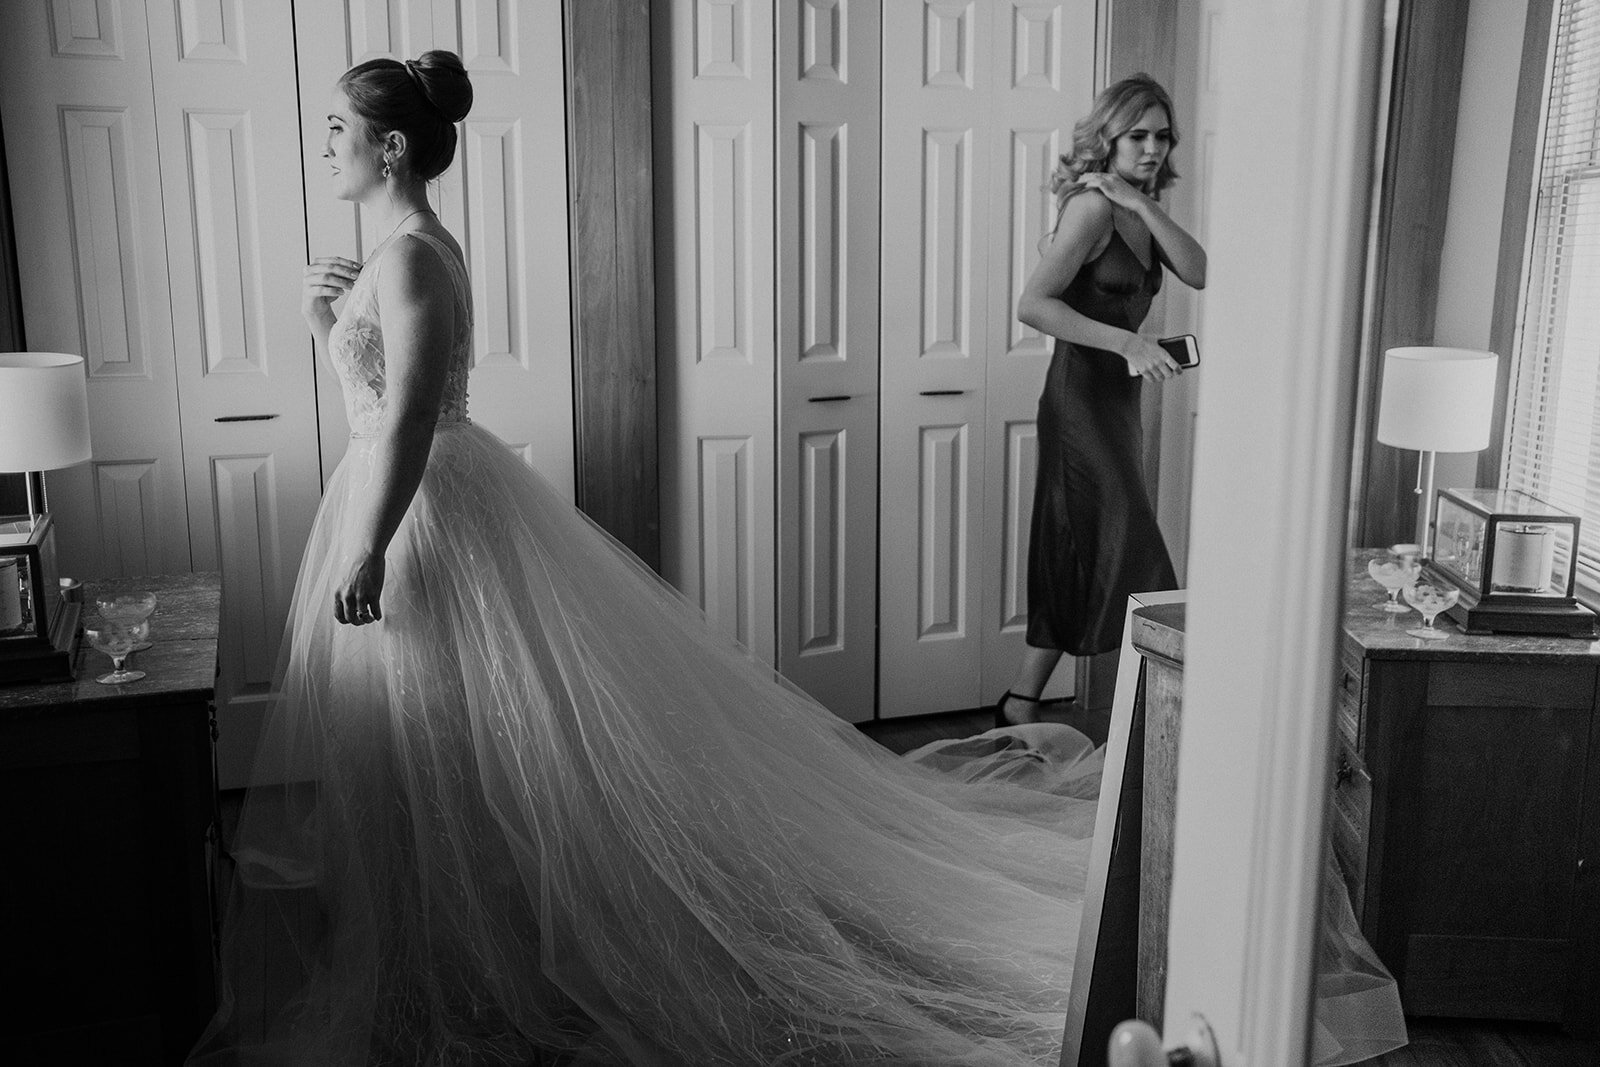 A bride looks out the window after putting on her wedding dress on her wedding day.